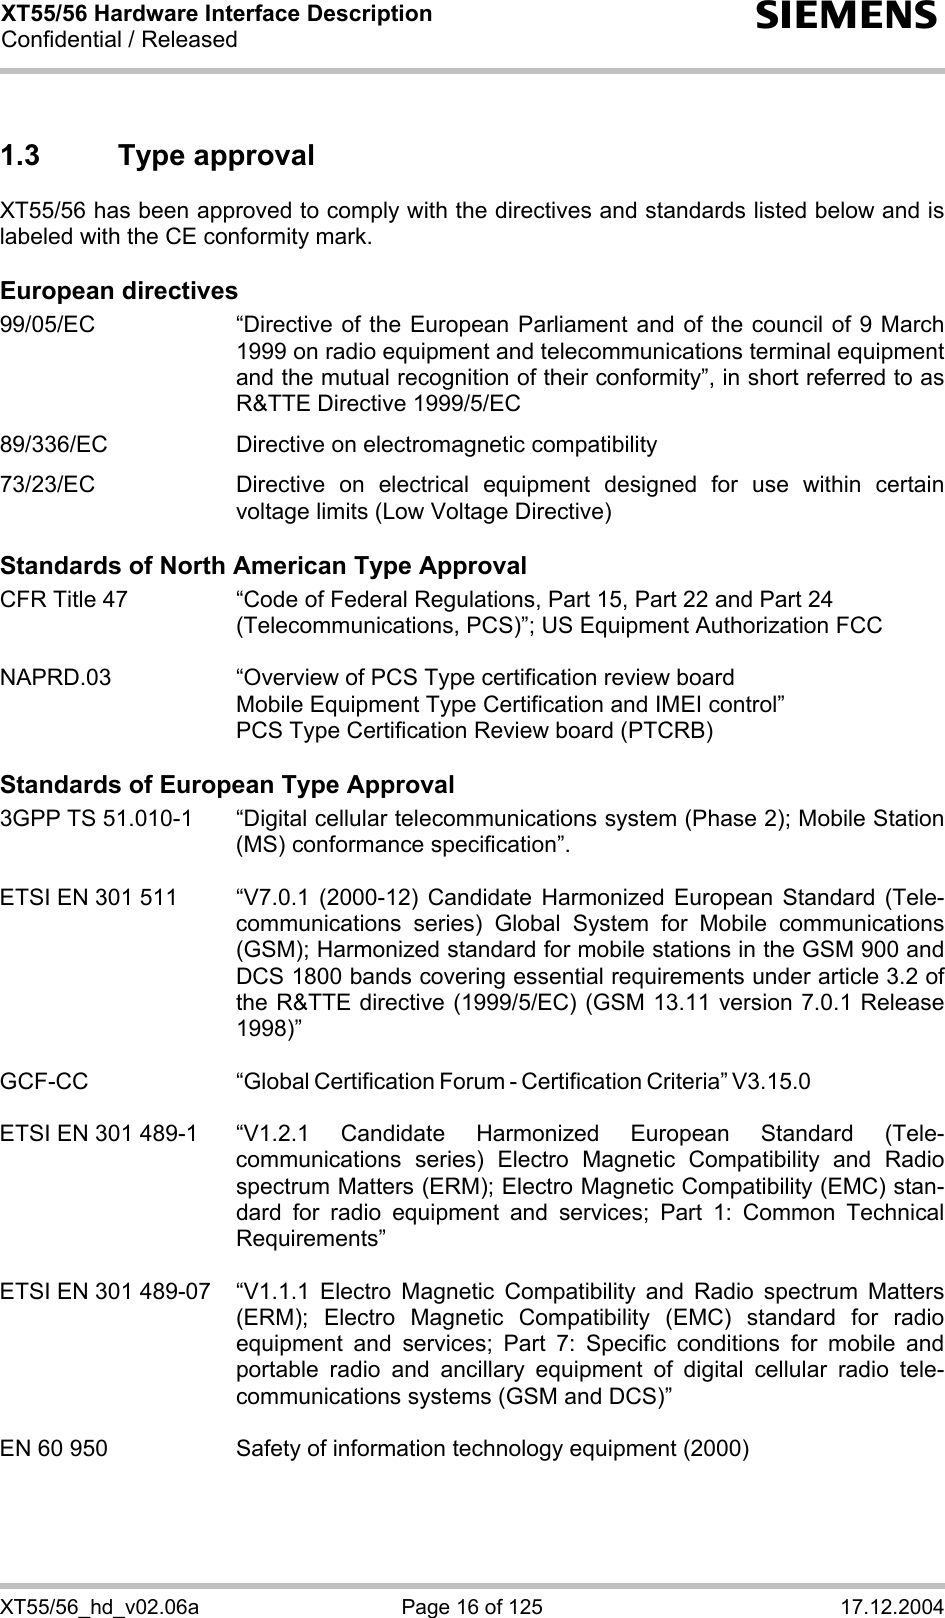 XT55/56 Hardware Interface Description Confidential / Released s XT55/56_hd_v02.06a  Page 16 of 125  17.12.2004 1.3 Type approval XT55/56 has been approved to comply with the directives and standards listed below and is labeled with the CE conformity mark.  European directives 99/05/EC  “Directive of the European Parliament and of the council of 9 March 1999 on radio equipment and telecommunications terminal equipment and the mutual recognition of their conformity”, in short referred to as R&amp;TTE Directive 1999/5/EC  89/336/EC  Directive on electromagnetic compatibility  73/23/EC  Directive on electrical equipment designed for use within certain voltage limits (Low Voltage Directive)  Standards of North American Type Approval CFR Title 47  “Code of Federal Regulations, Part 15, Part 22 and Part 24 (Telecommunications, PCS)”; US Equipment Authorization FCC  NAPRD.03  “Overview of PCS Type certification review board      Mobile Equipment Type Certification and IMEI control”     PCS Type Certification Review board (PTCRB)  Standards of European Type Approval 3GPP TS 51.010-1  “Digital cellular telecommunications system (Phase 2); Mobile Station (MS) conformance specification”.   ETSI EN 301 511  “V7.0.1 (2000-12) Candidate Harmonized European Standard (Tele-communications series) Global System for Mobile communications (GSM); Harmonized standard for mobile stations in the GSM 900 and DCS 1800 bands covering essential requirements under article 3.2 of the R&amp;TTE directive (1999/5/EC) (GSM 13.11 version 7.0.1 Release 1998)”   GCF-CC “Global Certification Forum - Certification Criteria” V3.15.0   ETSI EN 301 489-1  “V1.2.1 Candidate Harmonized European Standard (Tele-communications series) Electro Magnetic Compatibility and Radio spectrum Matters (ERM); Electro Magnetic Compatibility (EMC) stan-dard for radio equipment and services; Part 1: Common Technical Requirements”  ETSI EN 301 489-07  “V1.1.1 Electro Magnetic Compatibility and Radio spectrum Matters (ERM); Electro Magnetic Compatibility (EMC) standard for radio equipment and services; Part 7: Specific conditions for mobile and portable radio and ancillary equipment of digital cellular radio tele-communications systems (GSM and DCS)”   EN 60 950  Safety of information technology equipment (2000) 